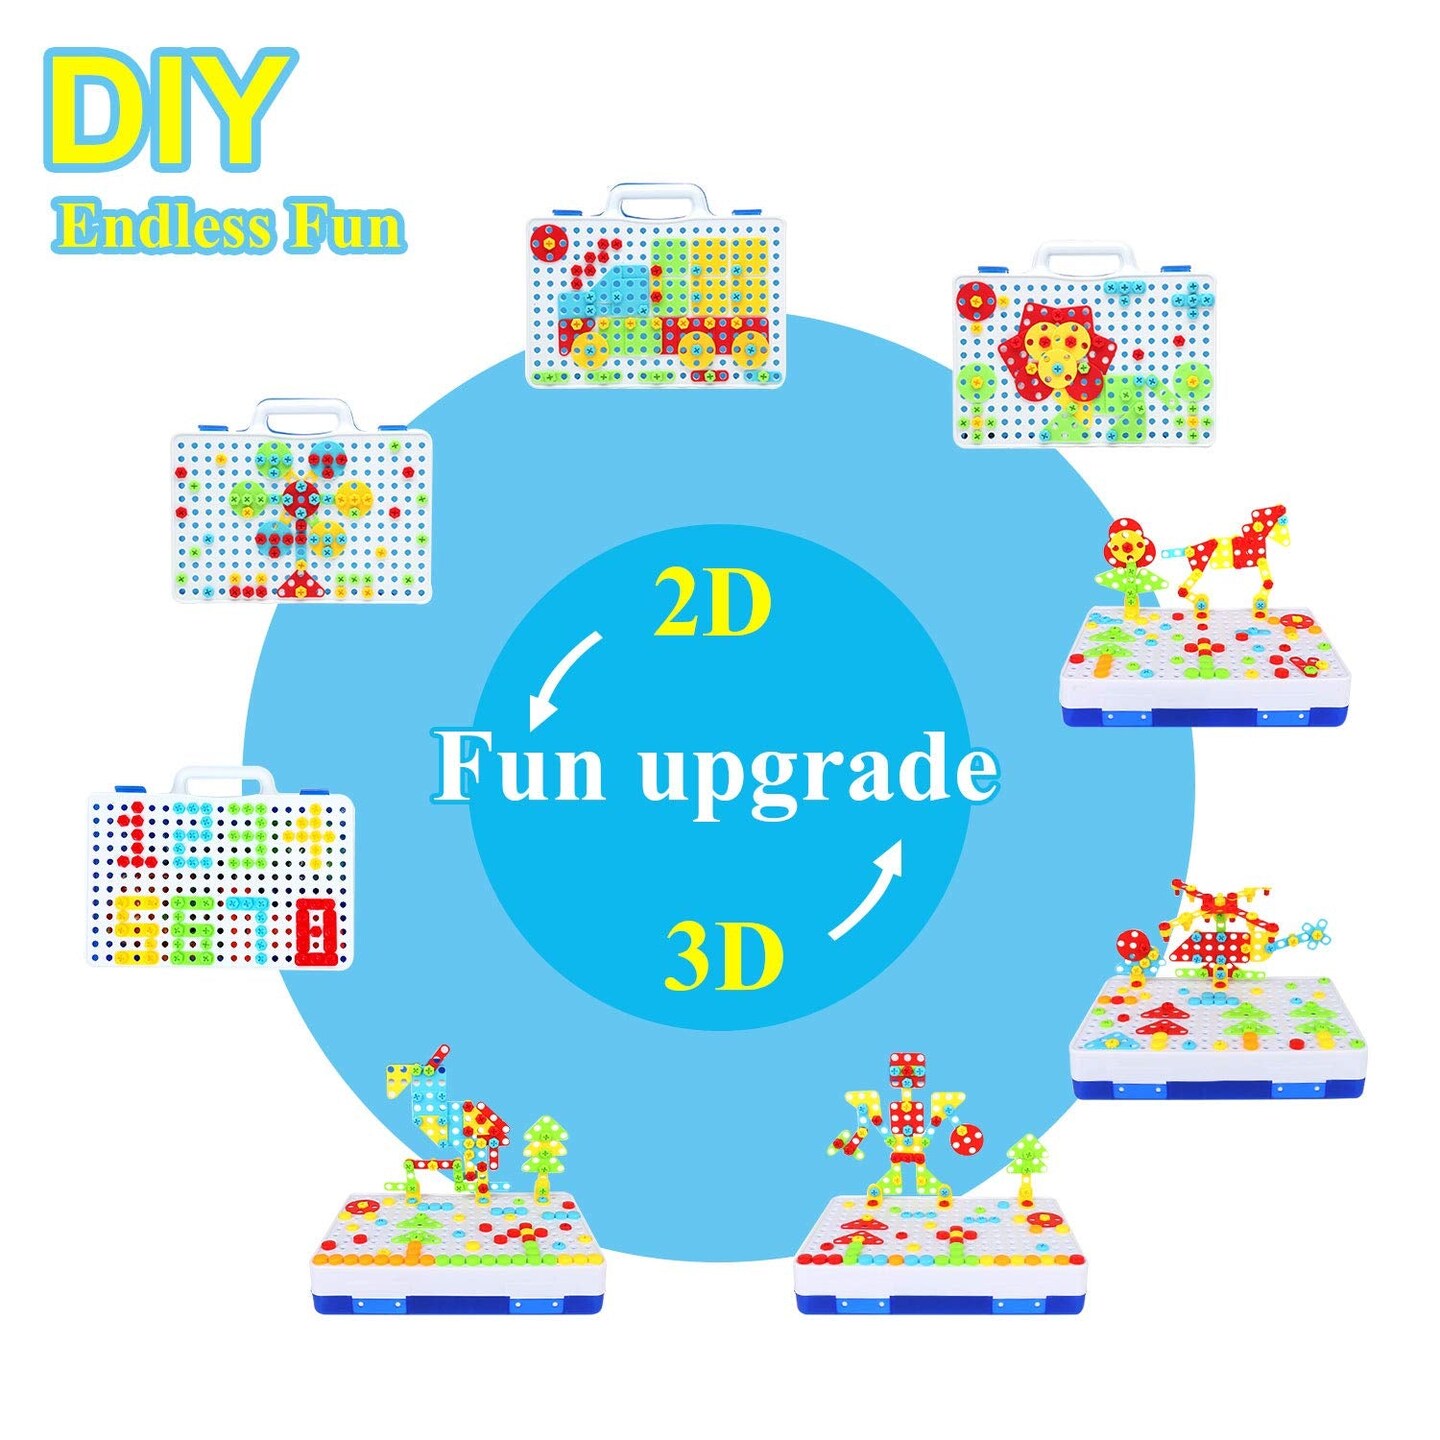 STEM Toys for 3 4 5 6 year old,Design and Drill Toy for Kid,Construction Games with Toy Drill,Creative Engineering Building Kits,Kid Tool Set for Toddler Preschool,Educational Toys for Boy and Girl